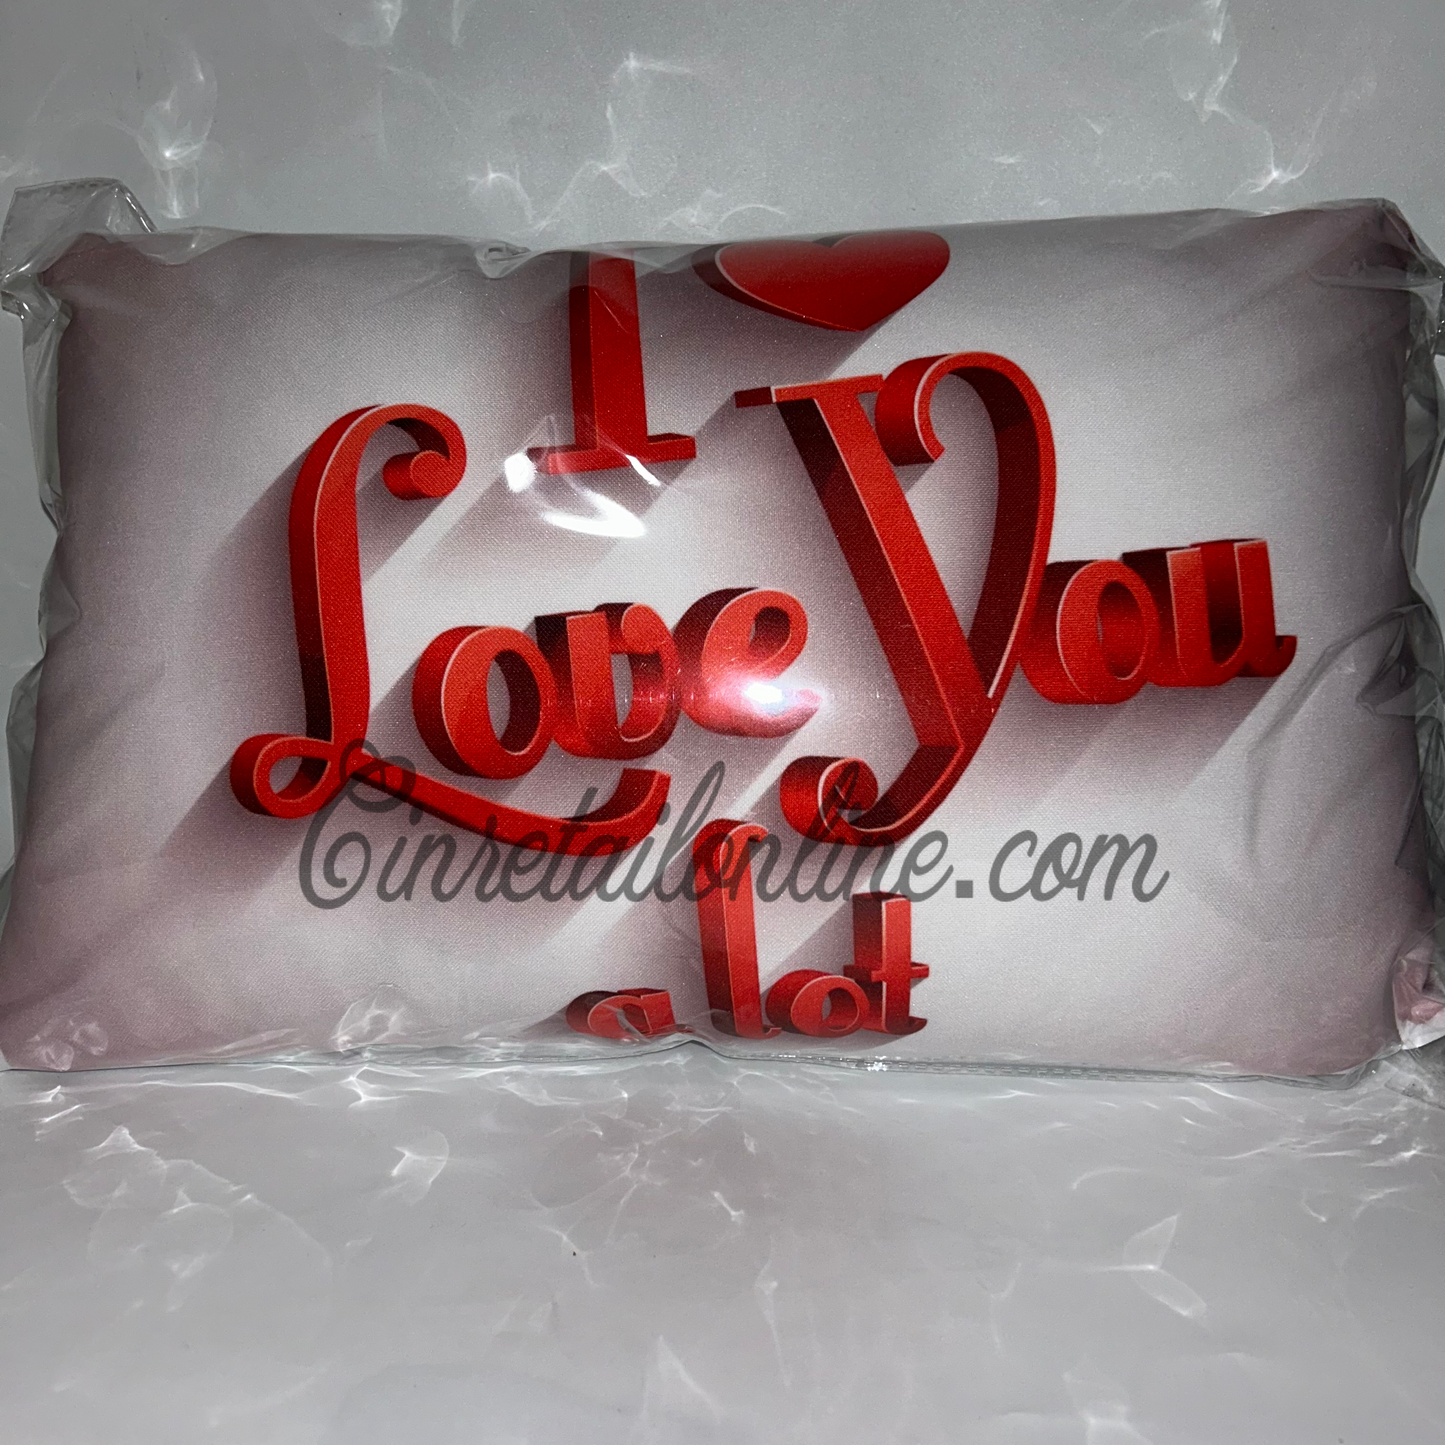 I love you pillow